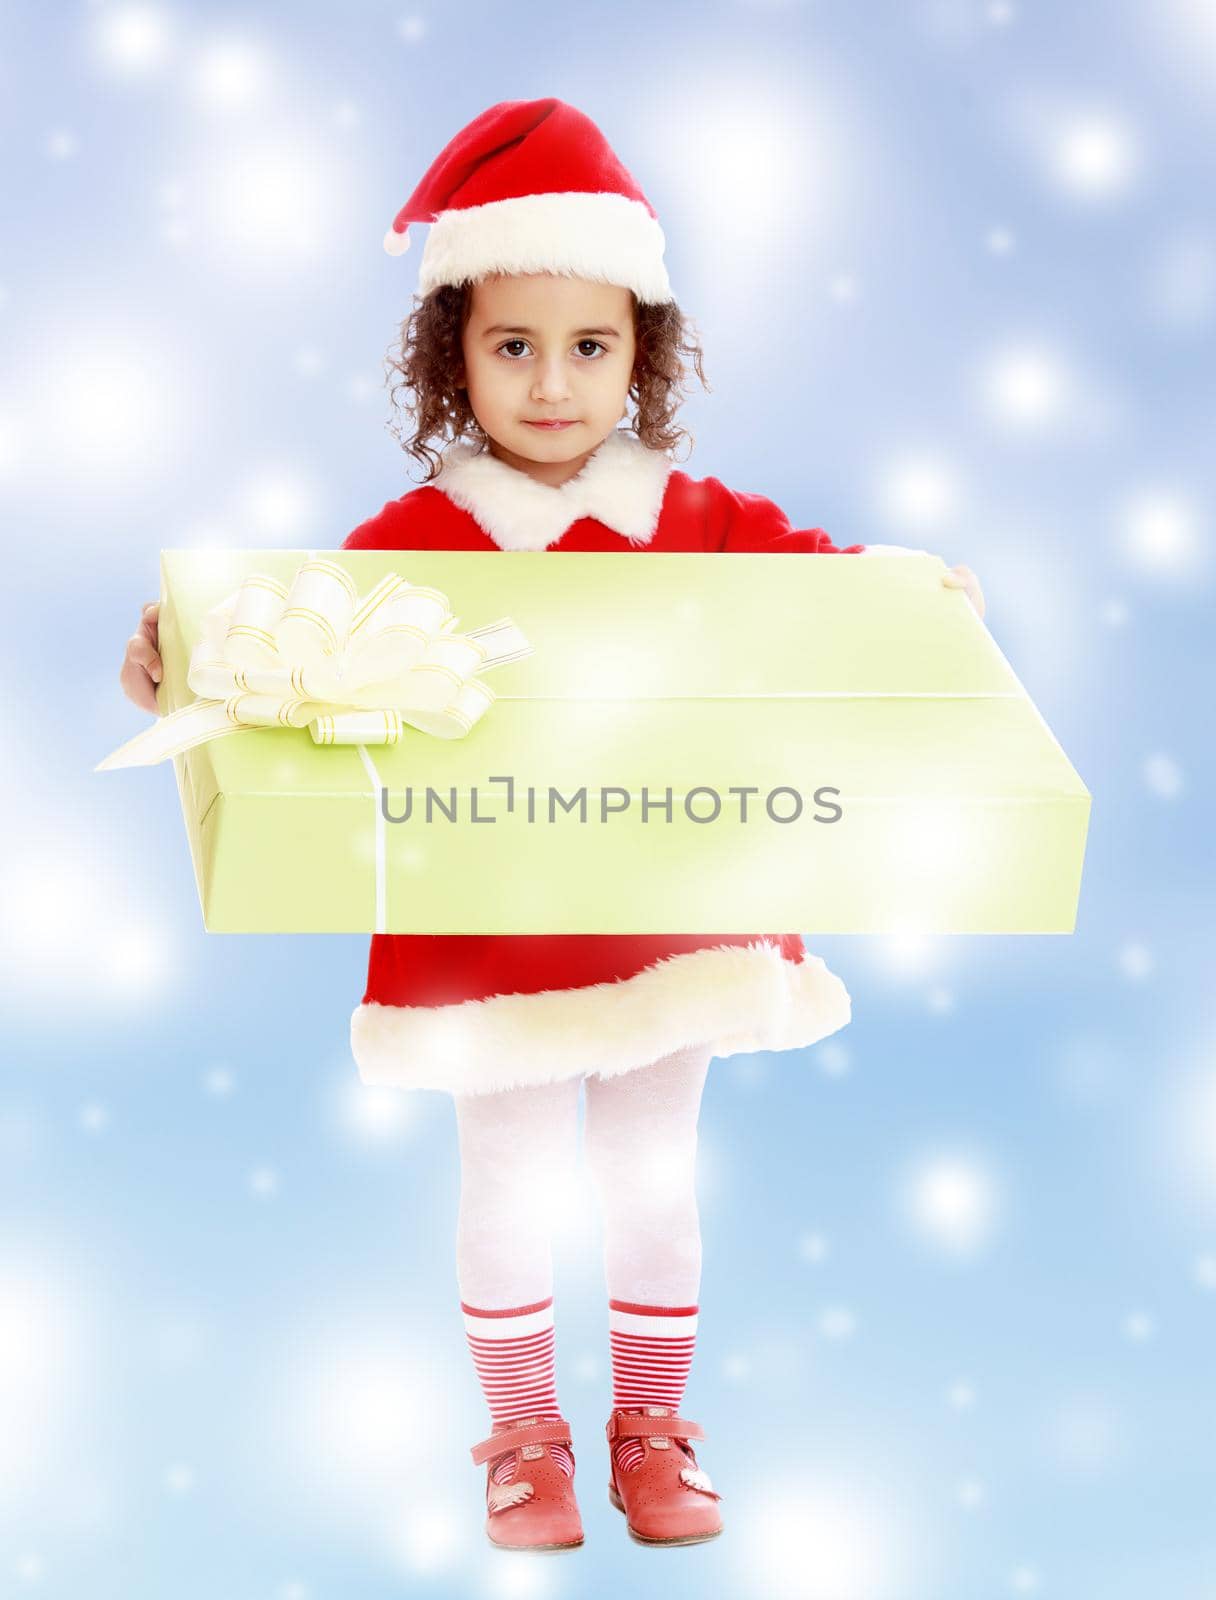 Cute little girl in a coat and hat of Santa Claus, holding a big green box , tied with a bow.Blue winter background with white snowflakes.